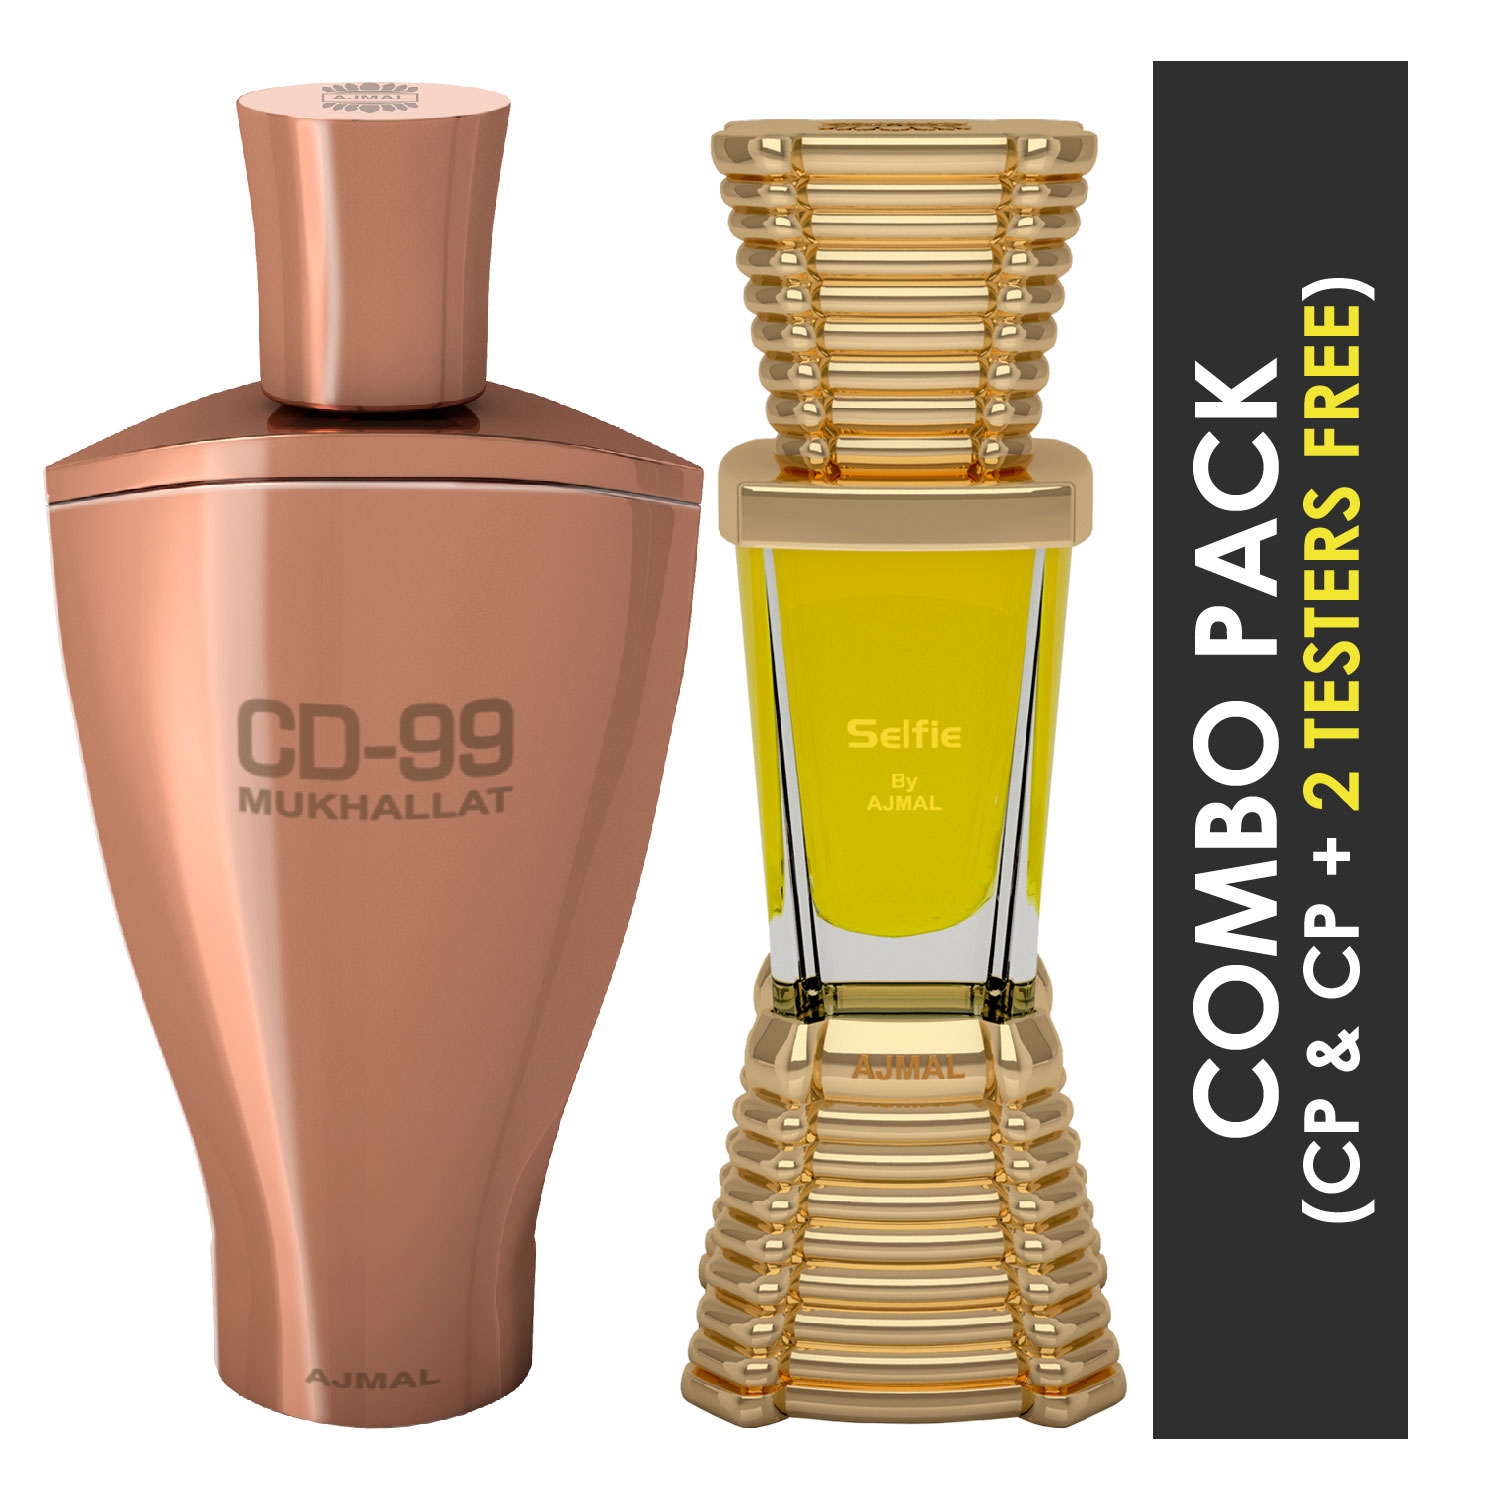 Ajmal | Ajmal CD 99 Mukhallat Concentrated Perfume Attar 14ml for Unisex and Selfie Concentrated Perfume Attar 10ml for Men+ 2 Parfum Testers FREE